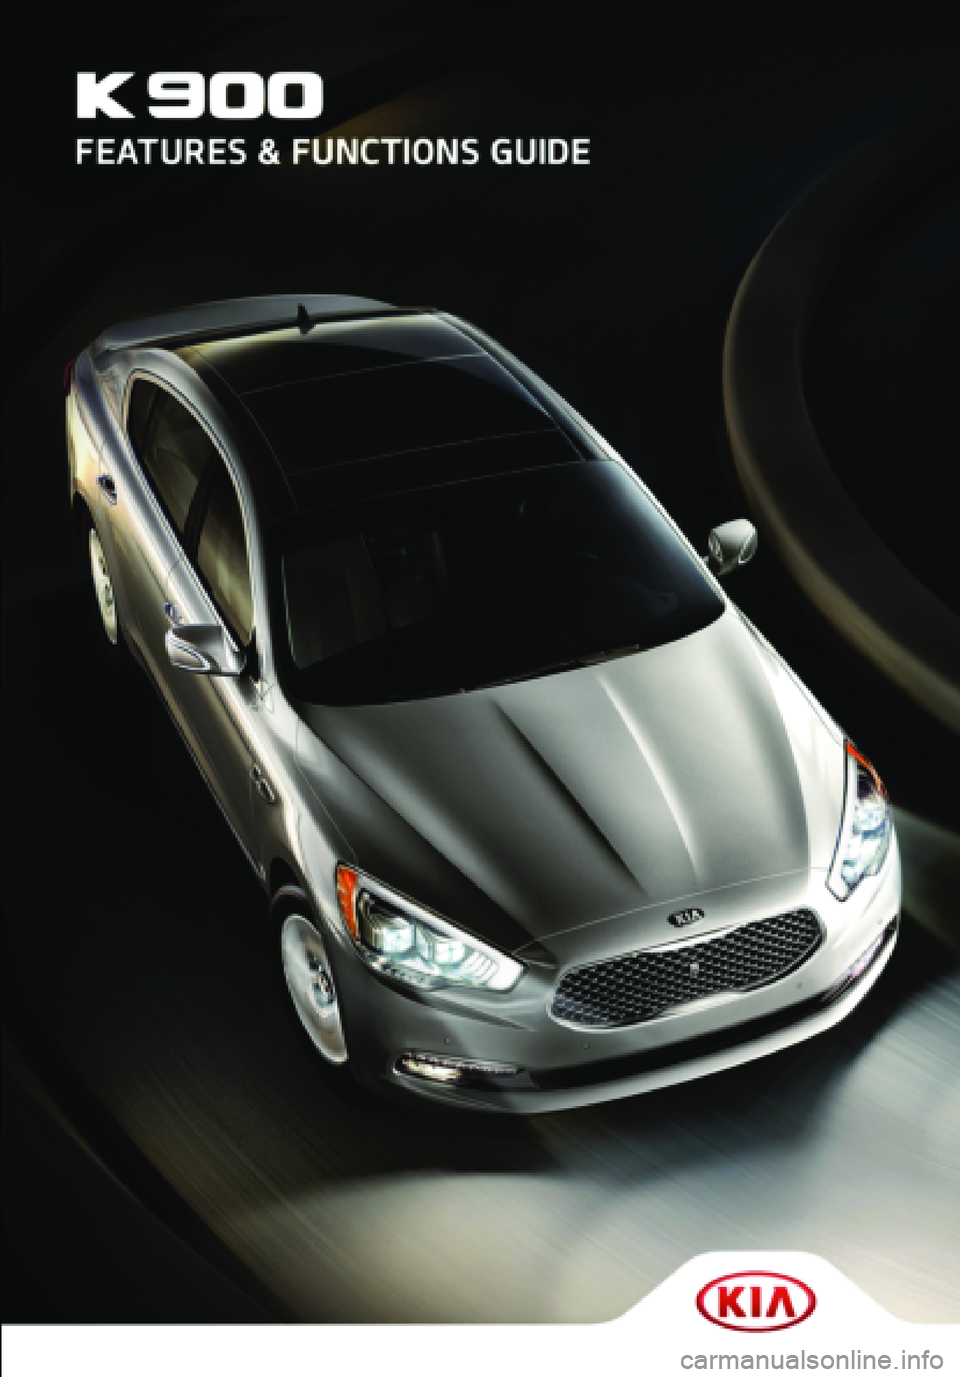 KIA K900 2016  Features and Functions Guide   K900 CUSTOMER DELIVERY CHECKLIST
  Confirm “Good Battery” with Kia GR8-1299 battery tester 
  Verify all tire pressures are to spec (see driver’s door label)          LF    LR    RF    RR  
  